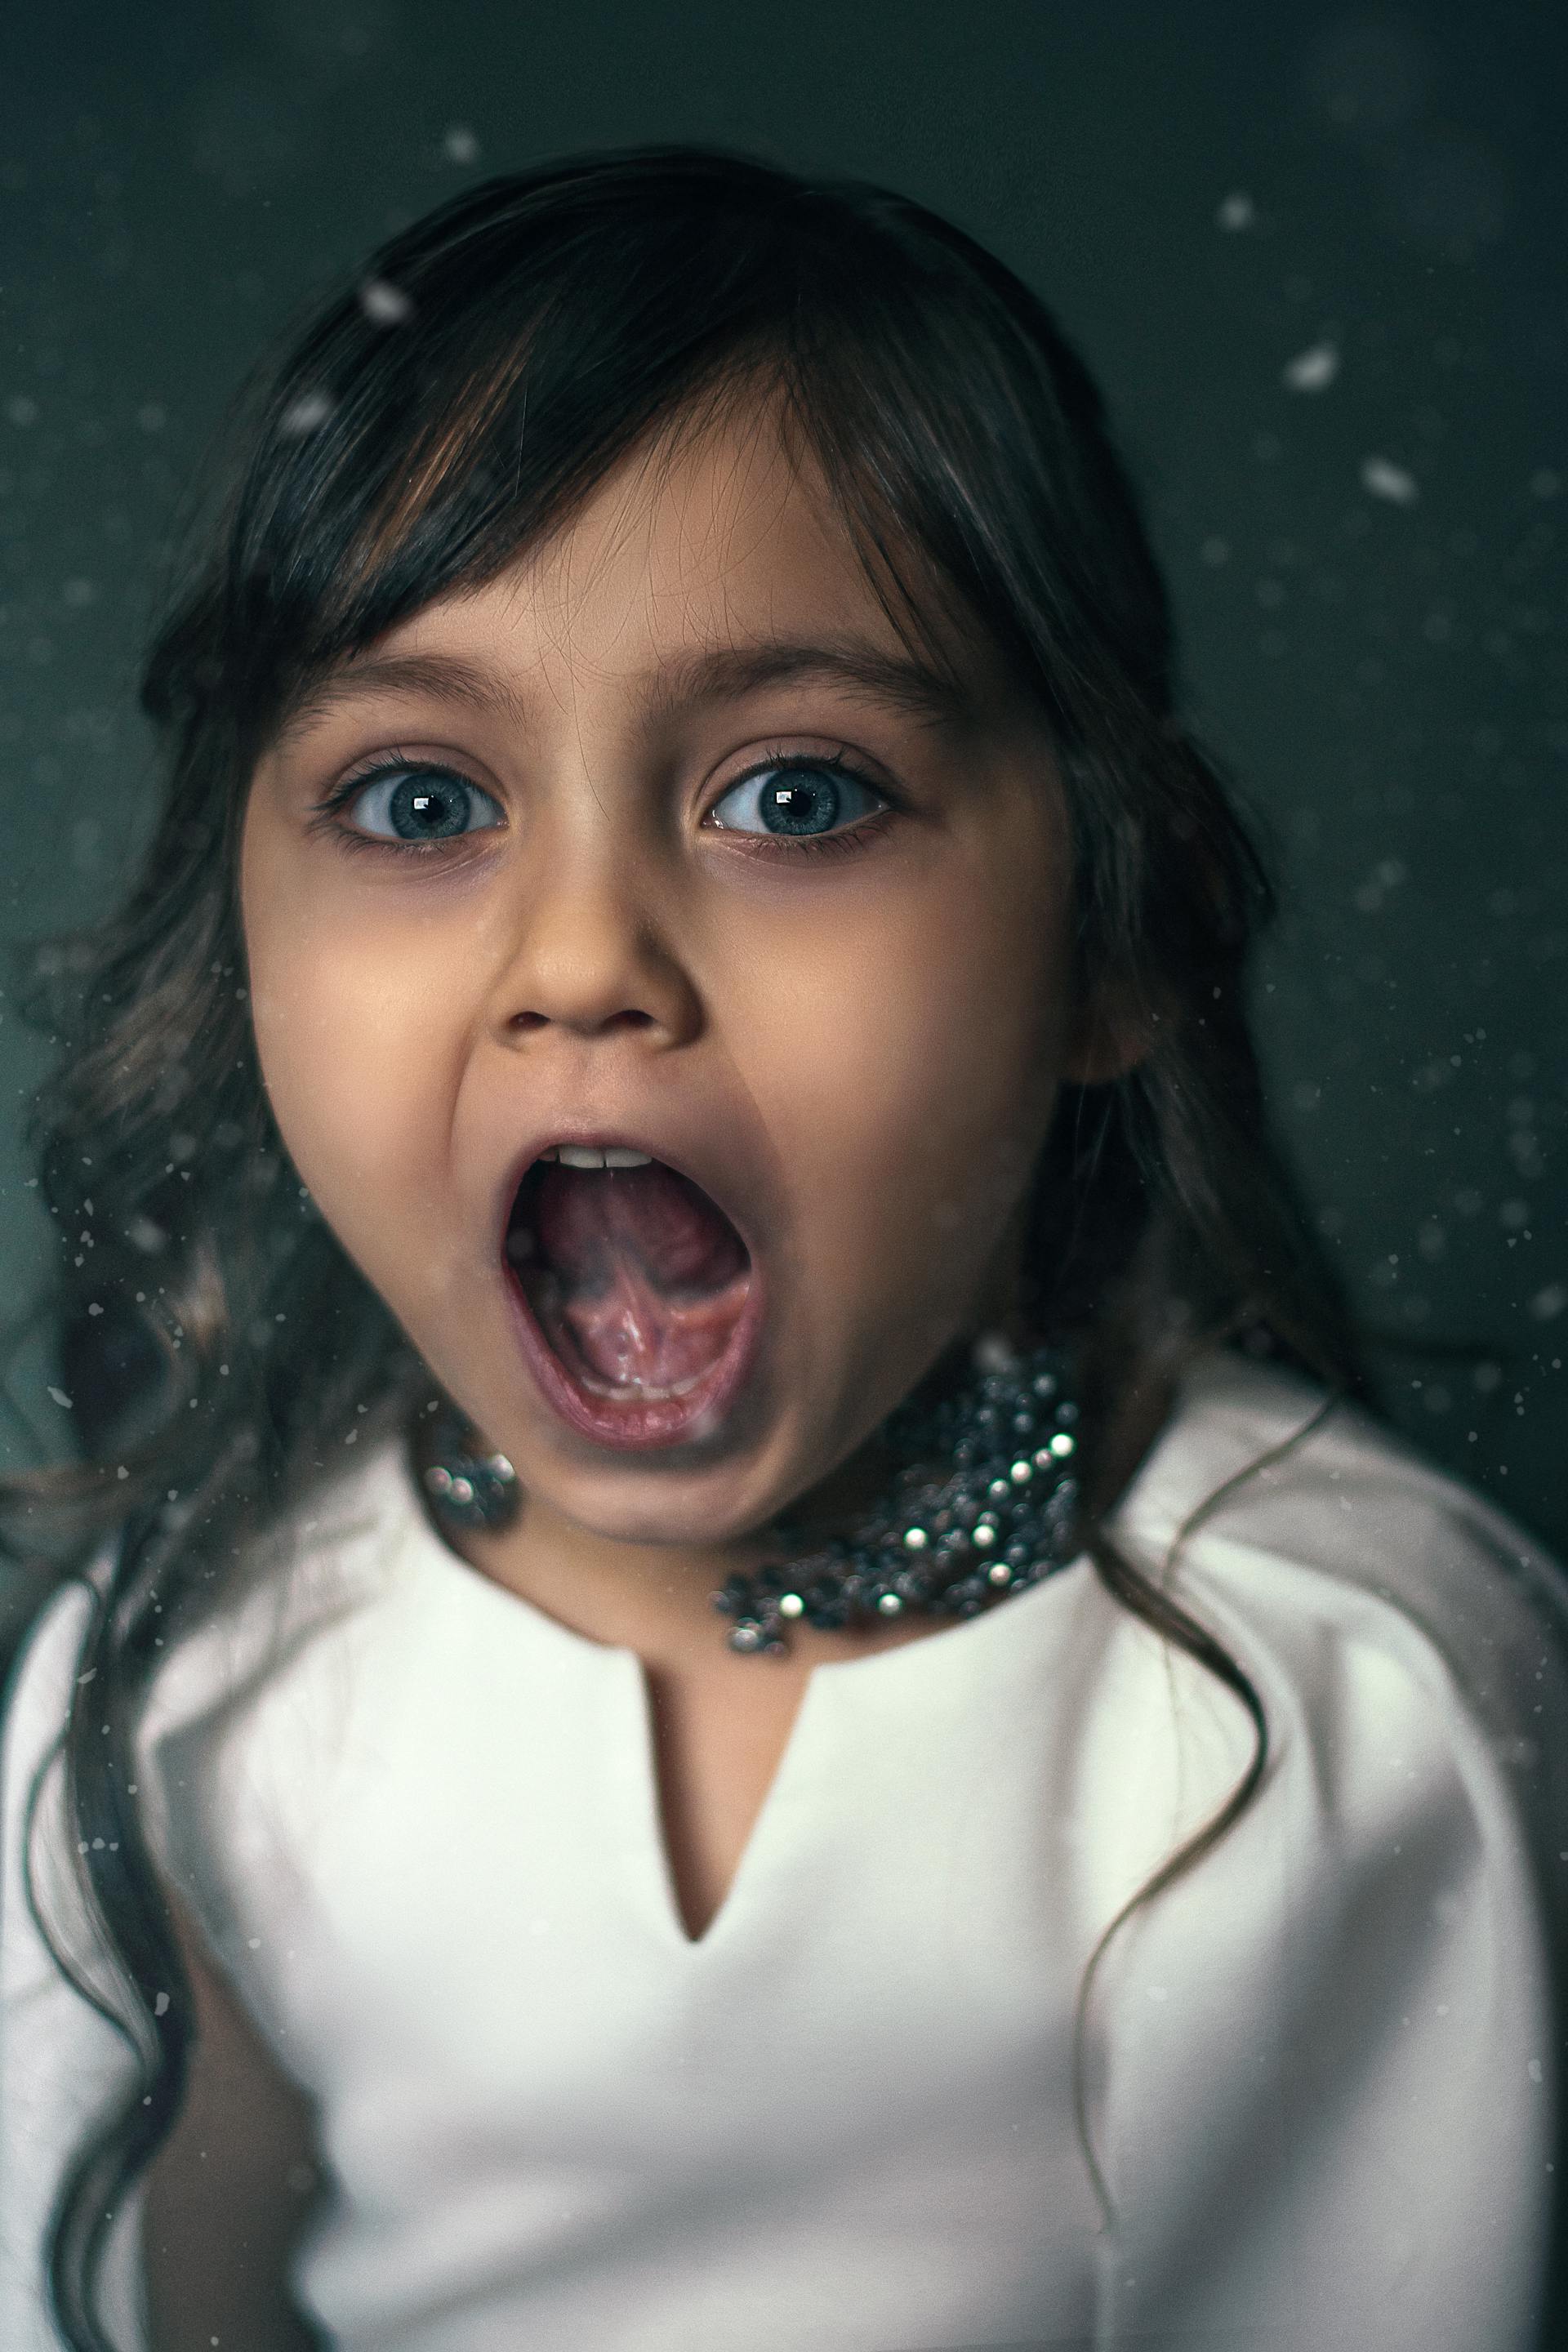 A close-up of an angry little girl | Source: Pexels